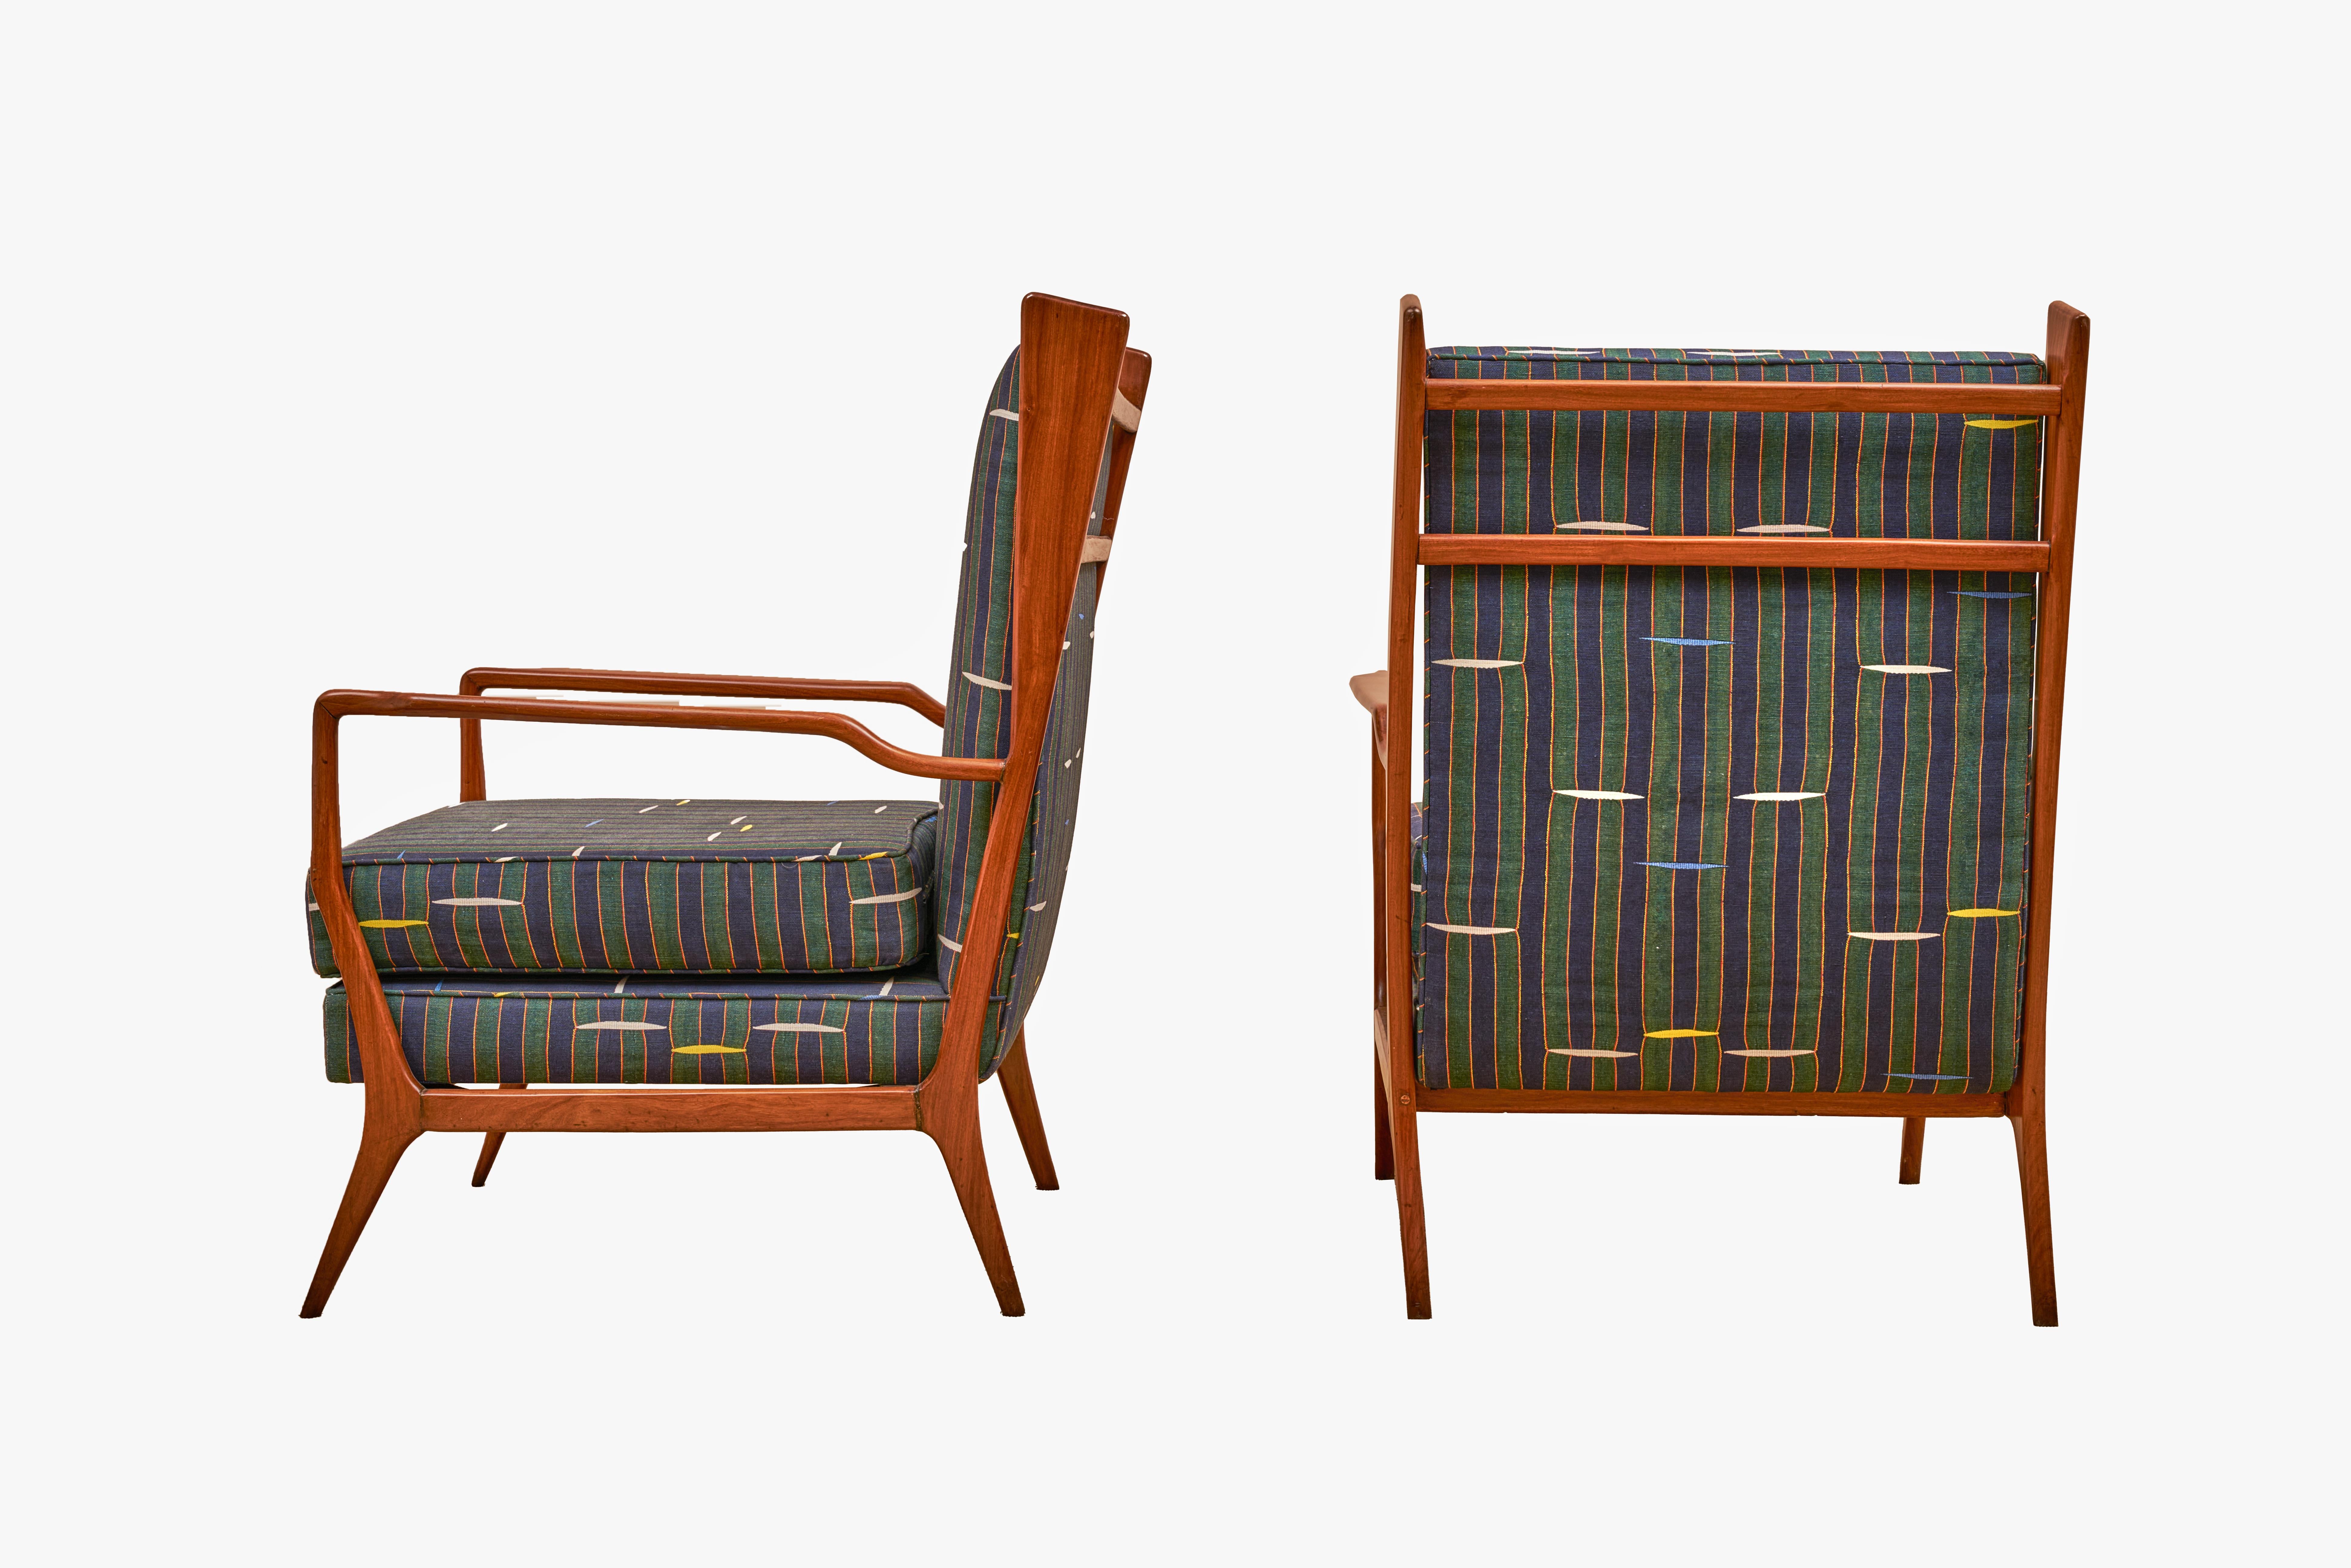 A remarkable pair of Rino Levi armchairs from the 1960s, newly upholstered in Jennifer Shorto fabric Blips and IFS, a mix of linen and cotton in a Panama weave with a design of vertical bars yoked by colorful dashes in lively blue and green. These